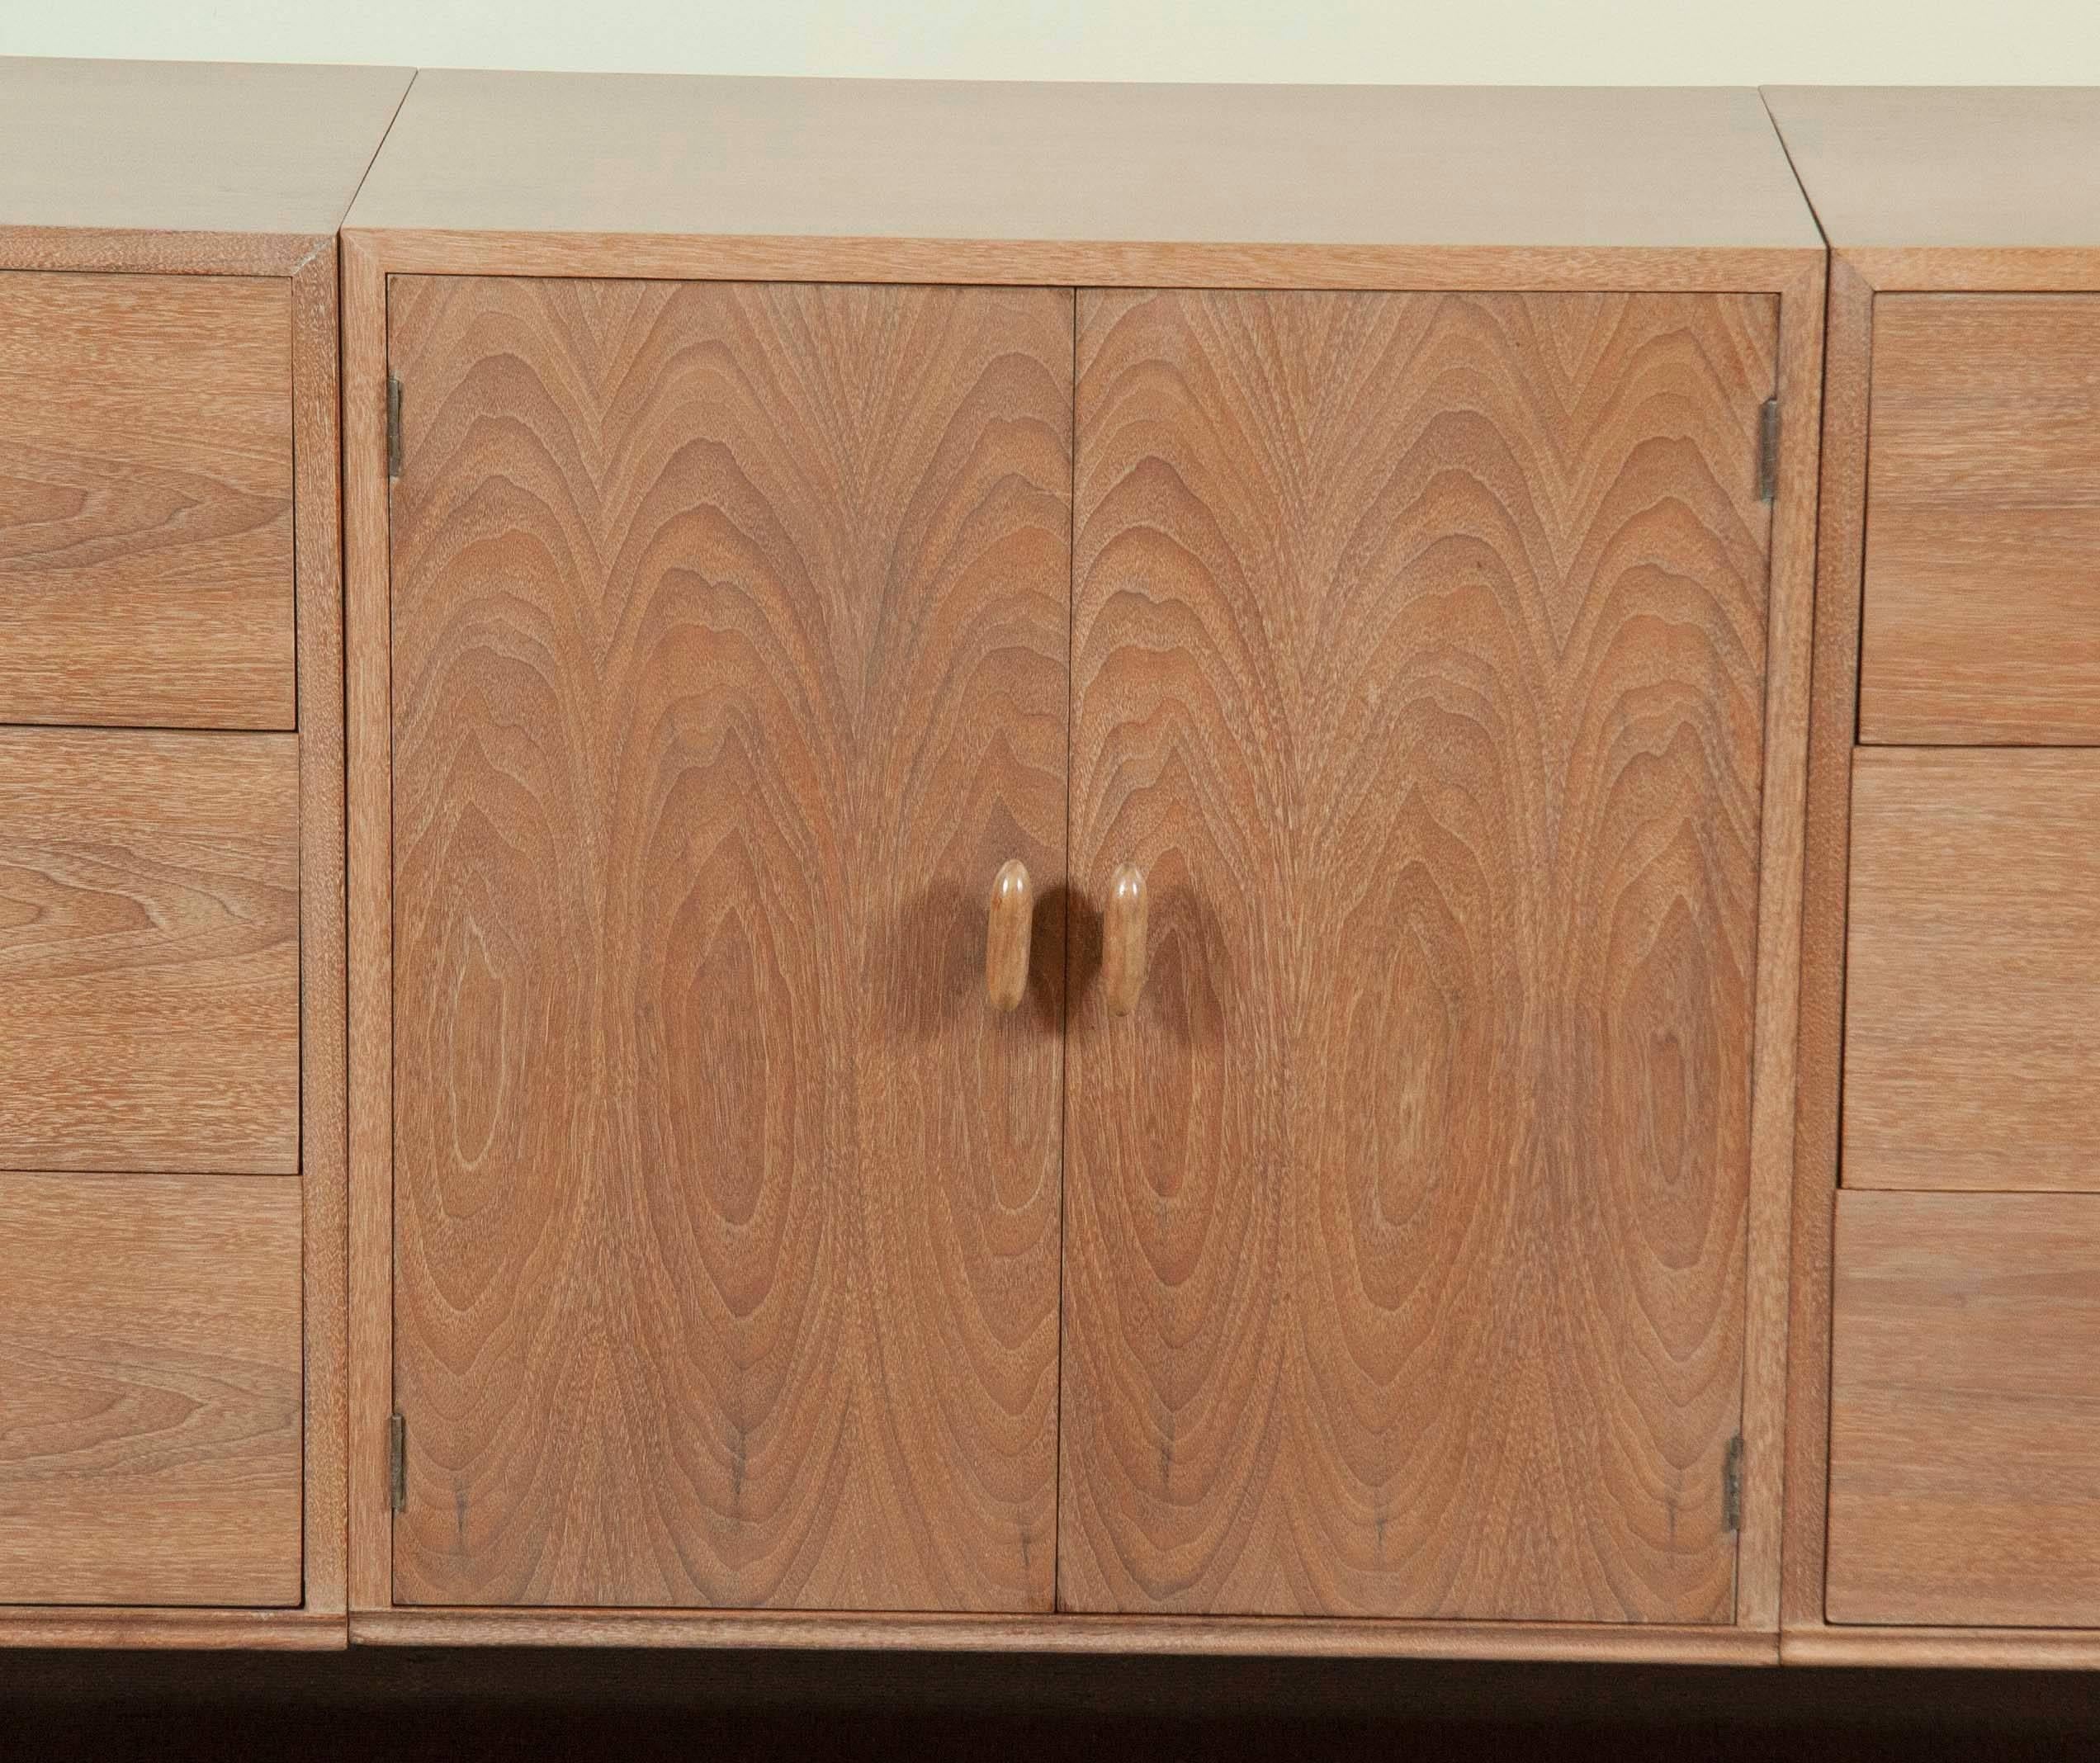 Walnut Large Chest Designed by Oscar Stonorov & Willo Von Moltke for Moma Exhibit